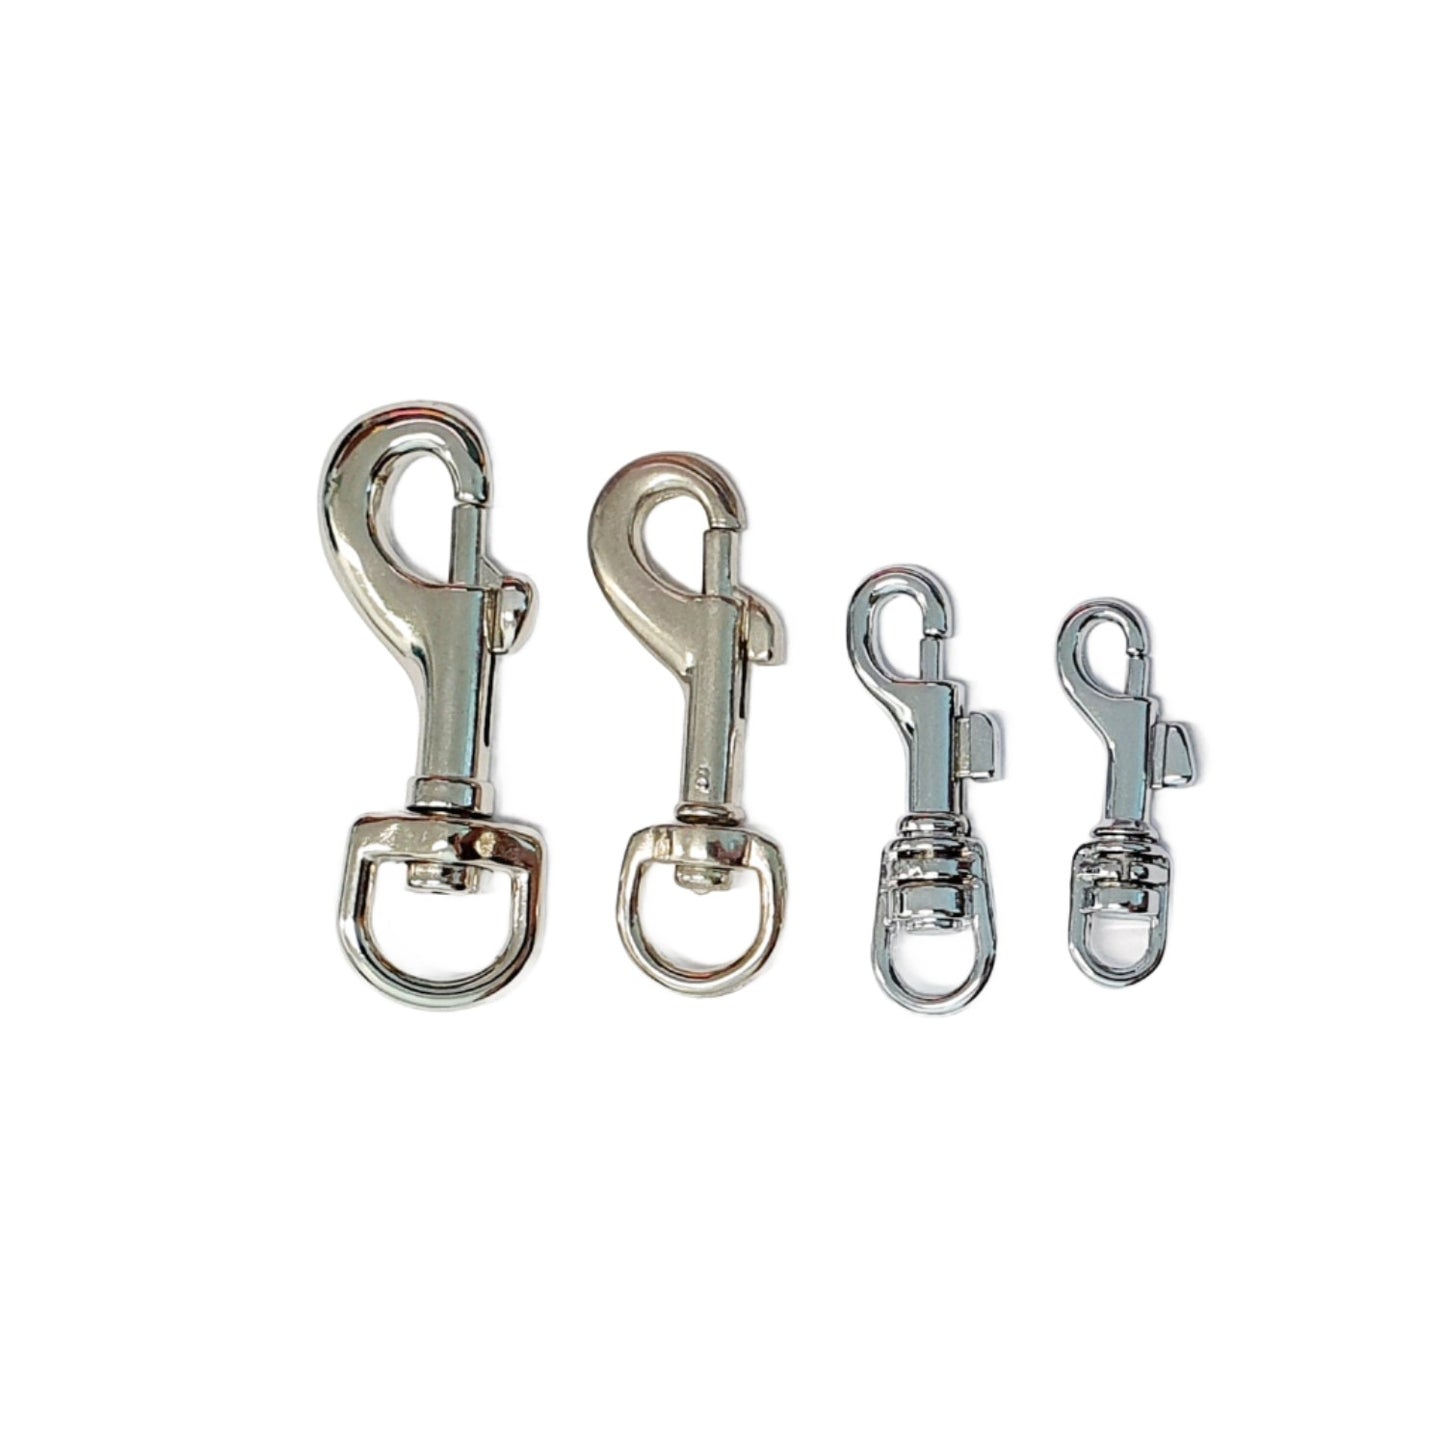 Swivel Trojan Clip for Tie On Leads Chrome - Small, Medium, Large and XL Available